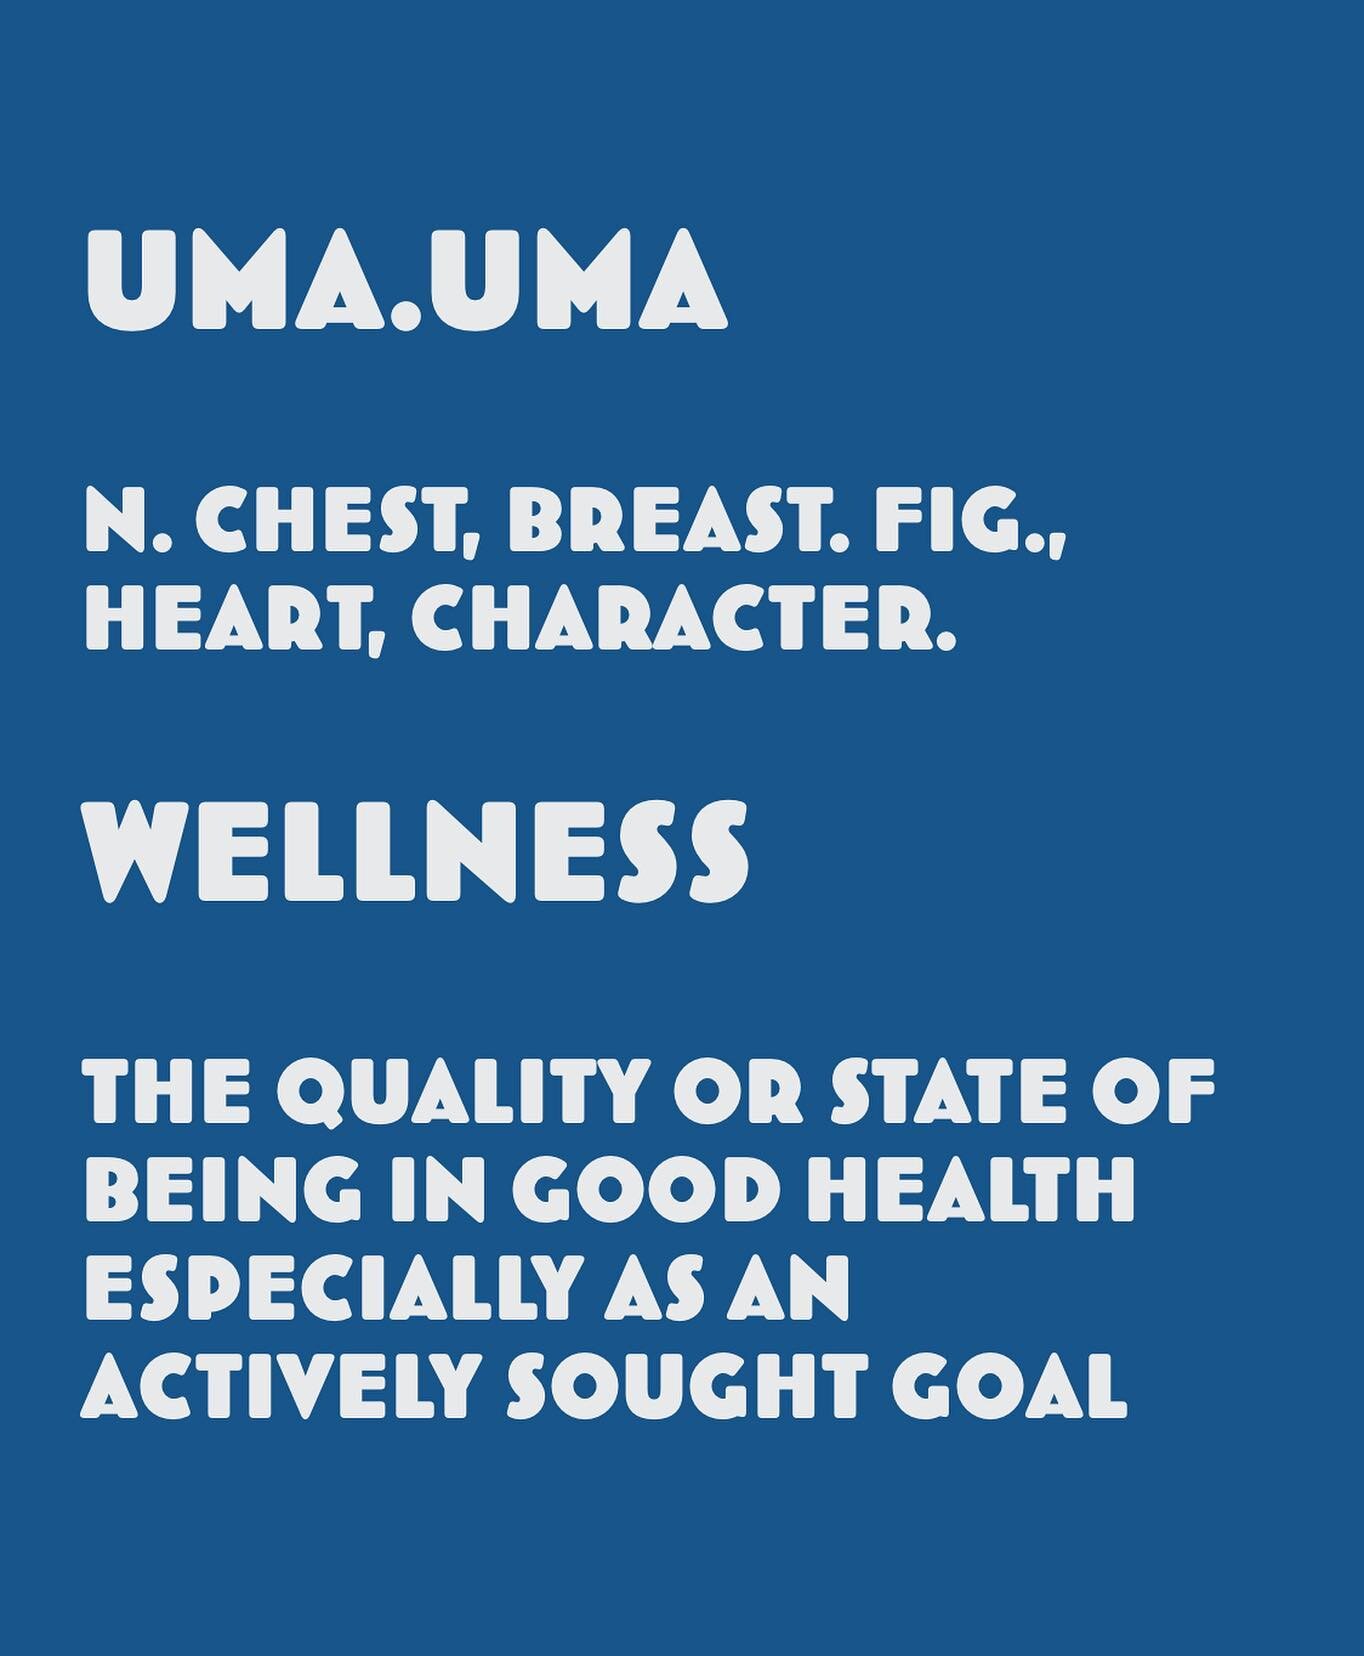 ✨Welcome to UMAUMA WELLNESS ✨
🎉
The full website is now live 🙌🏽 
umaumawellness.com
🎉
Click the link in bio to peruse the offerings and learn more about me, Daphne Kauahi&rsquo;ilani Jenkins @daphne_k_jenkins 👩🏾&zwj;💻 
🎉
Please reach out with